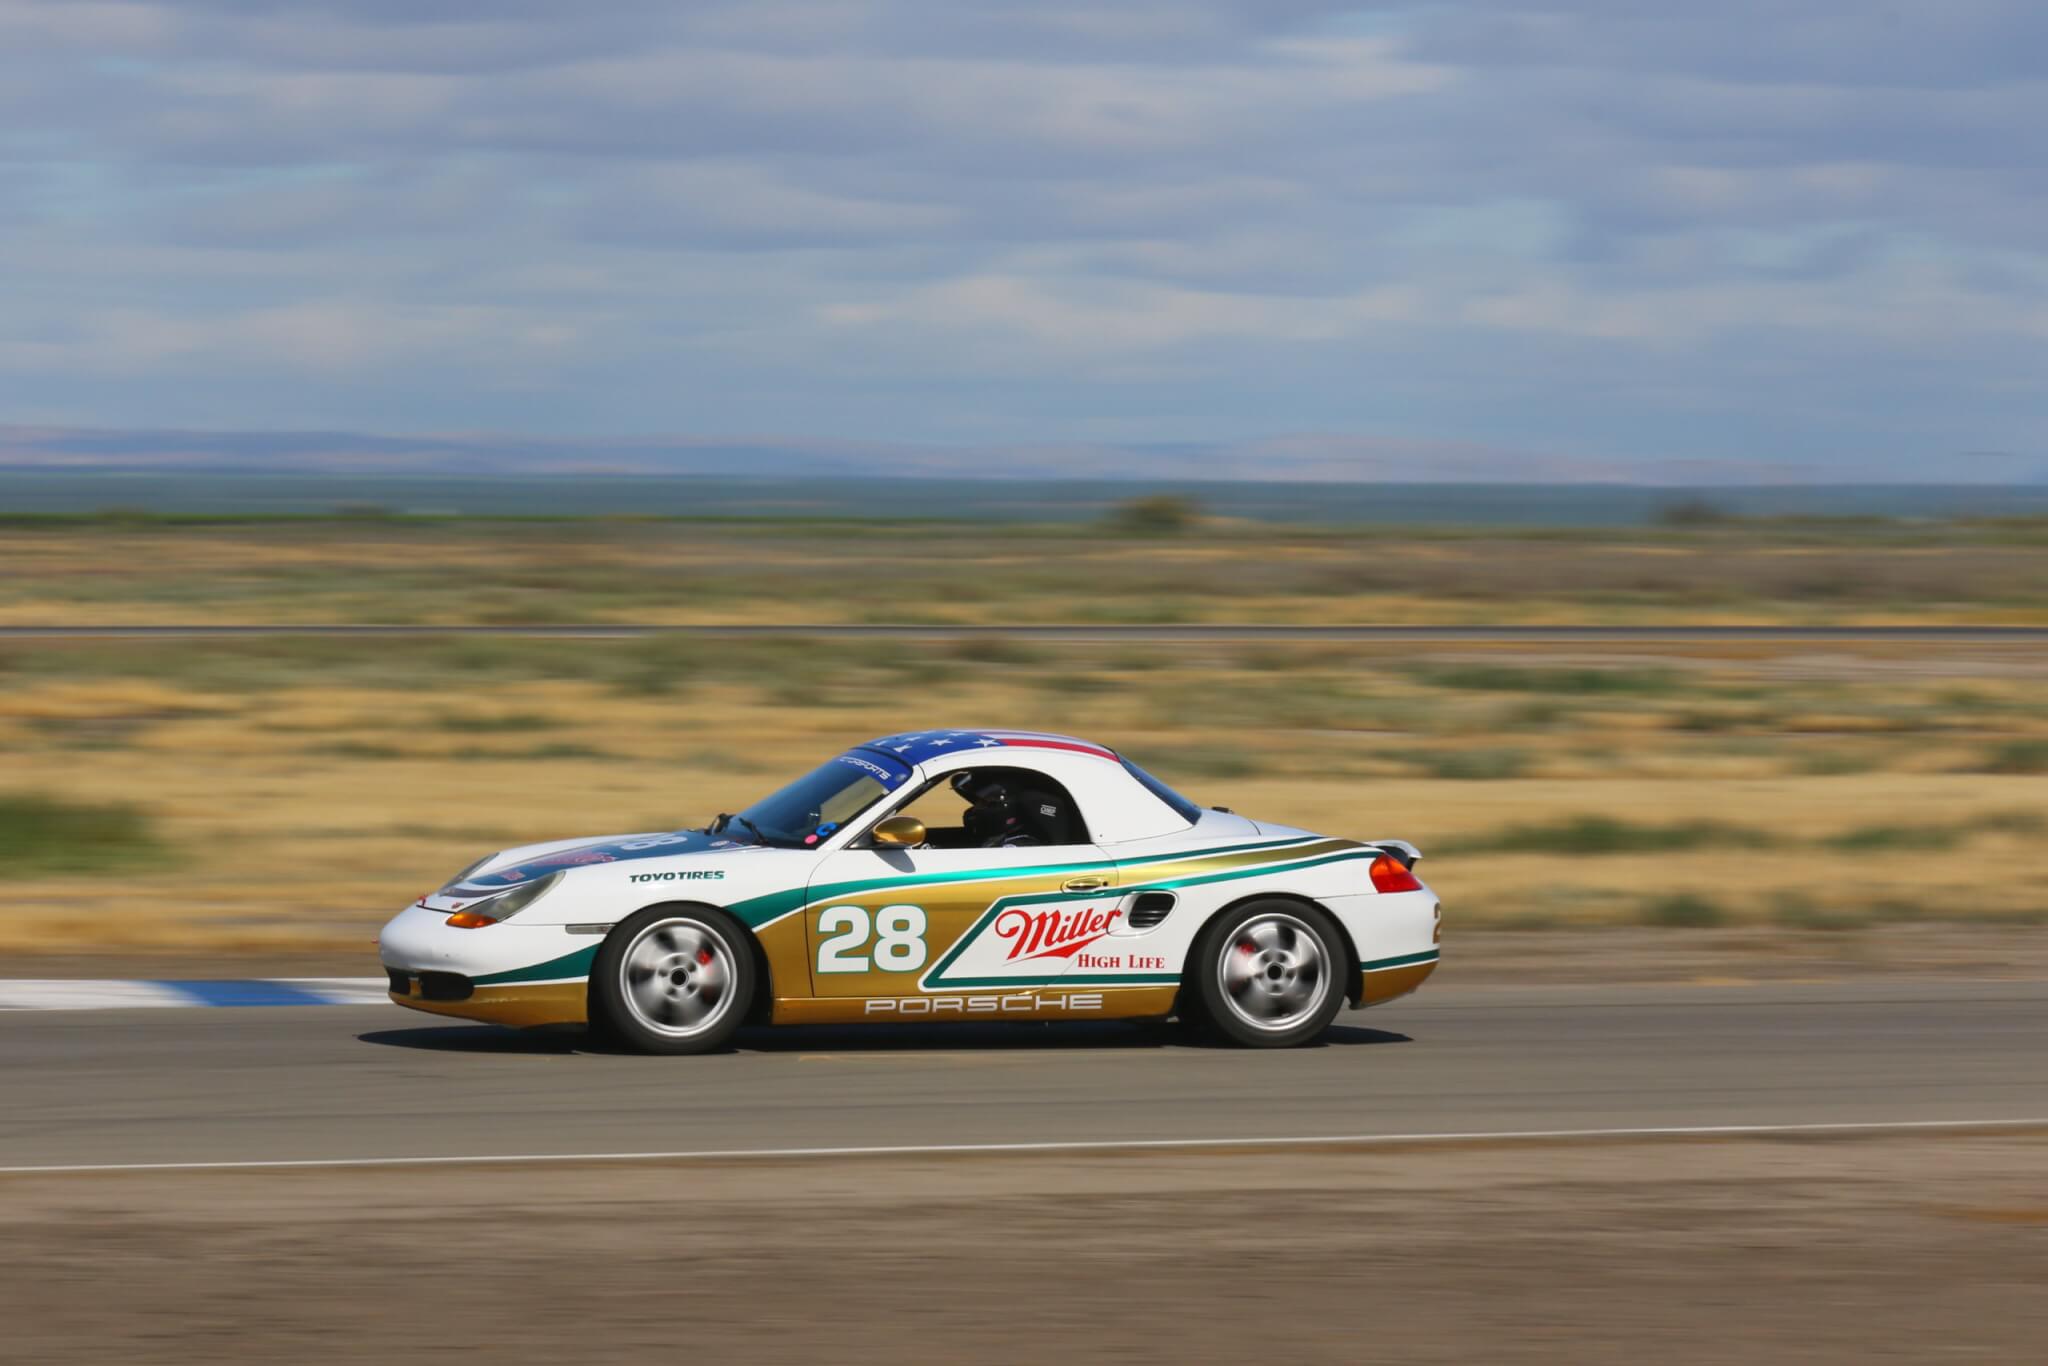 #28 Spec Boxster zipping by at Buttonwillow